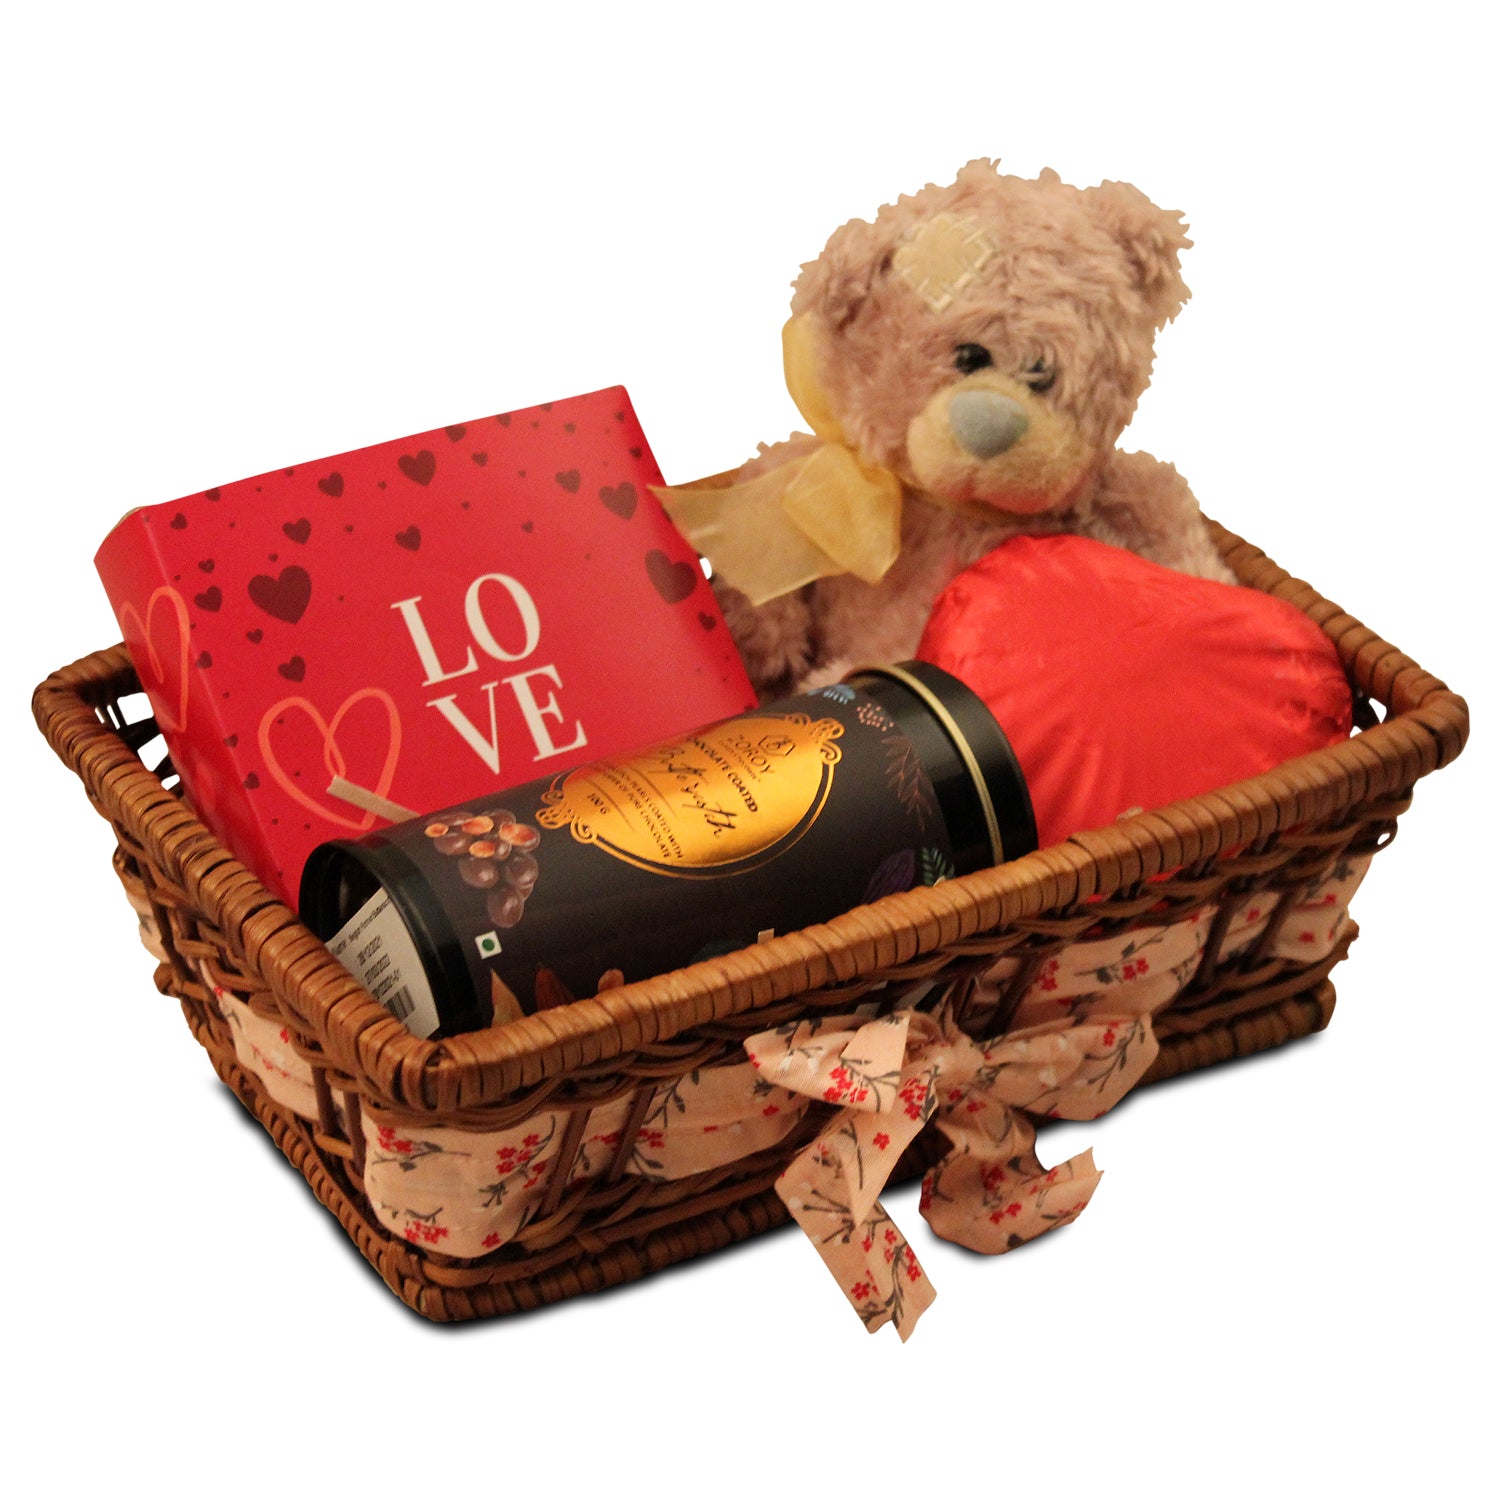 ZOROY Luxury Chocolate Valentines Essential Hamper | Assorted Chocolates | A gift for someone you love | Heart shaped milk chocolate | Chocolate coated nuts 100G | Teddy bear | 100% Veg